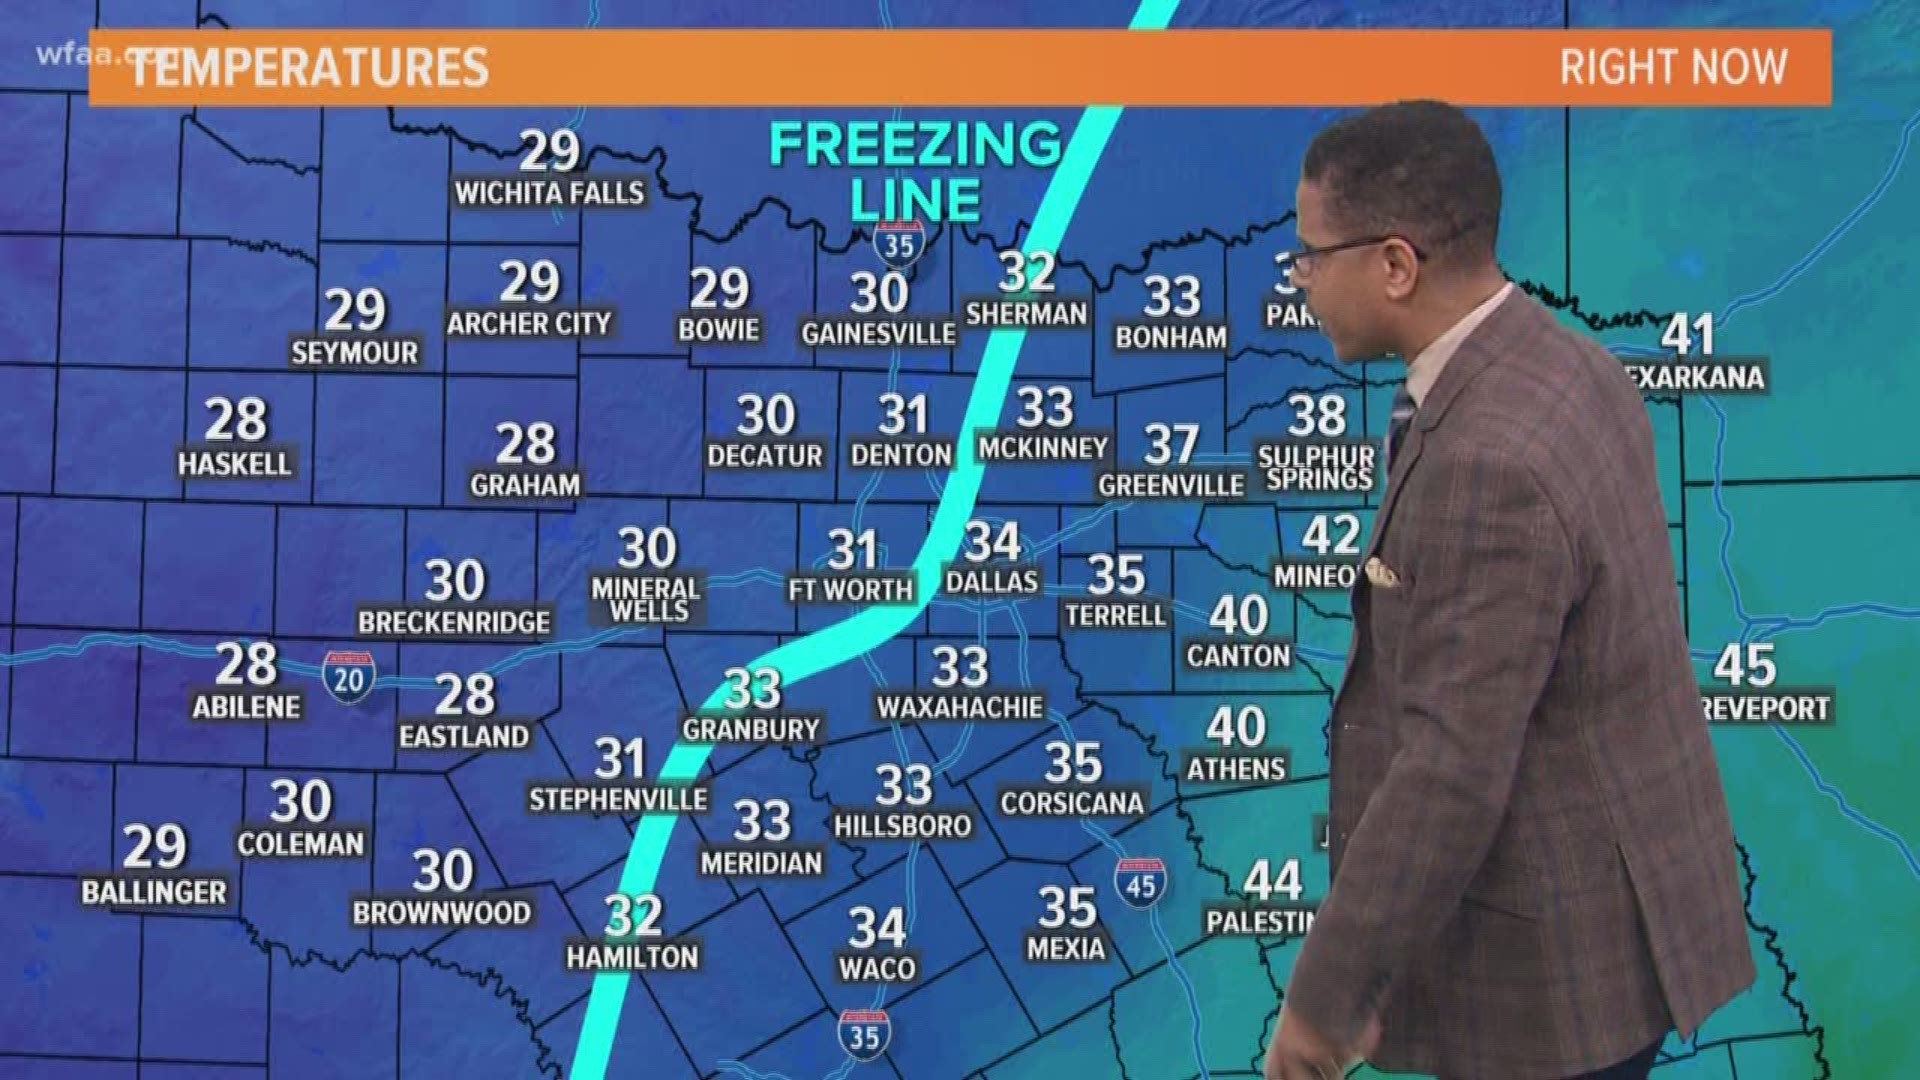 The freezing line was through the middle of Dallas-Fort Worth, with the colder temperatures to the west.